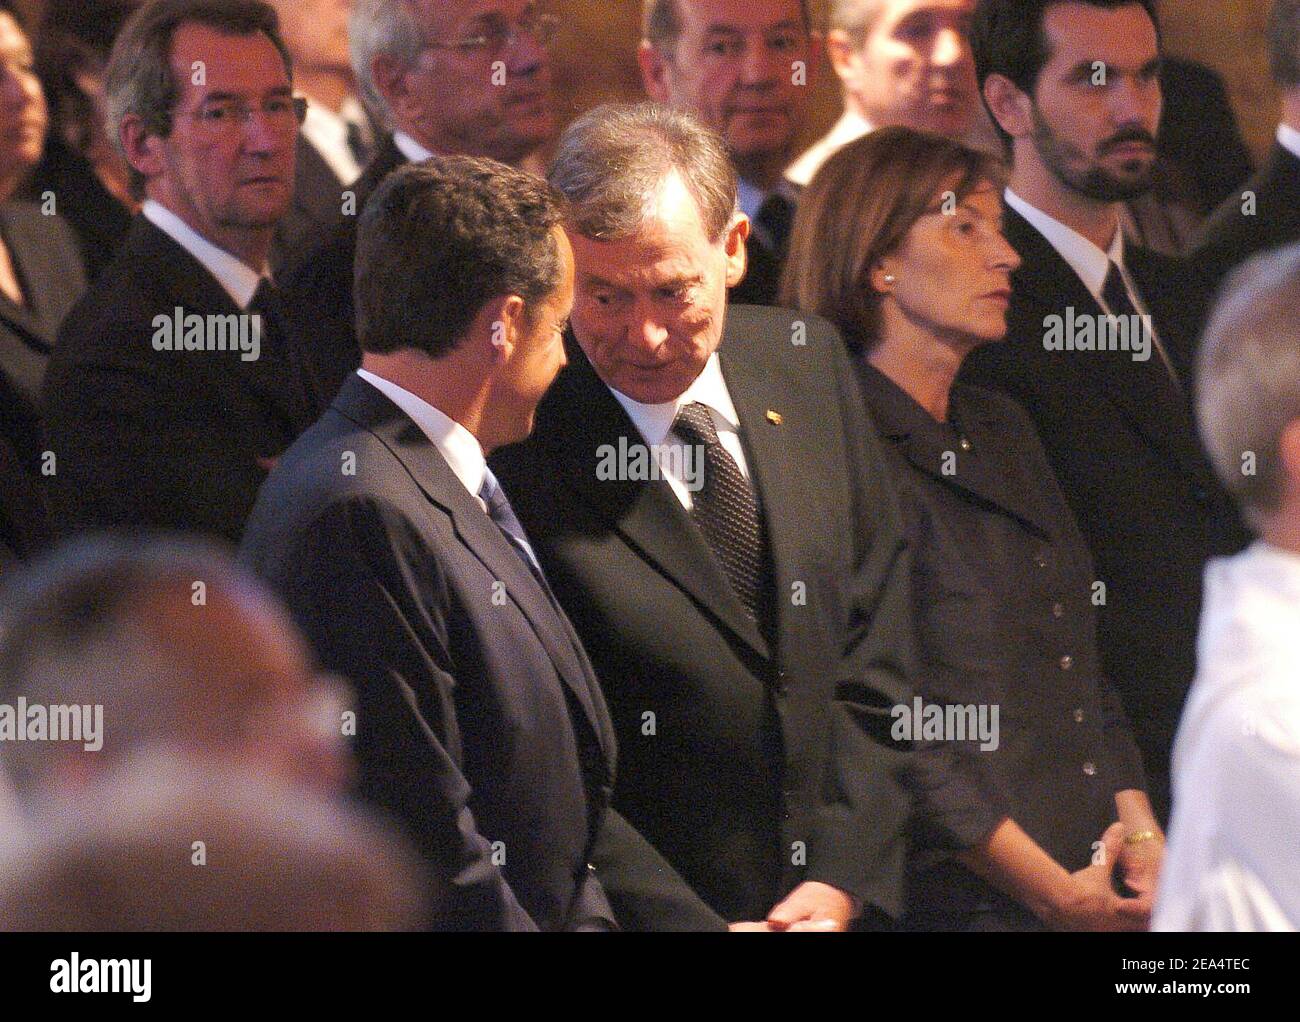 French Interior Minister Nicolas Sarkozy, German President Horst Koehler and his wife Eva attend the funeral of Brother Roger Schutz, the leader of the Taize ecumenical community, held at the community's Reconciliation church in Taize, central France, on August 23, 2005. Brother Roger, 90, was slain last week when a 36-year-old mentally disturbed Romanian woman slit his throat in front of 2,500 pilgrims praying at the church. Photo by Bruno Klein/ABACAPRESS.COM Stock Photo